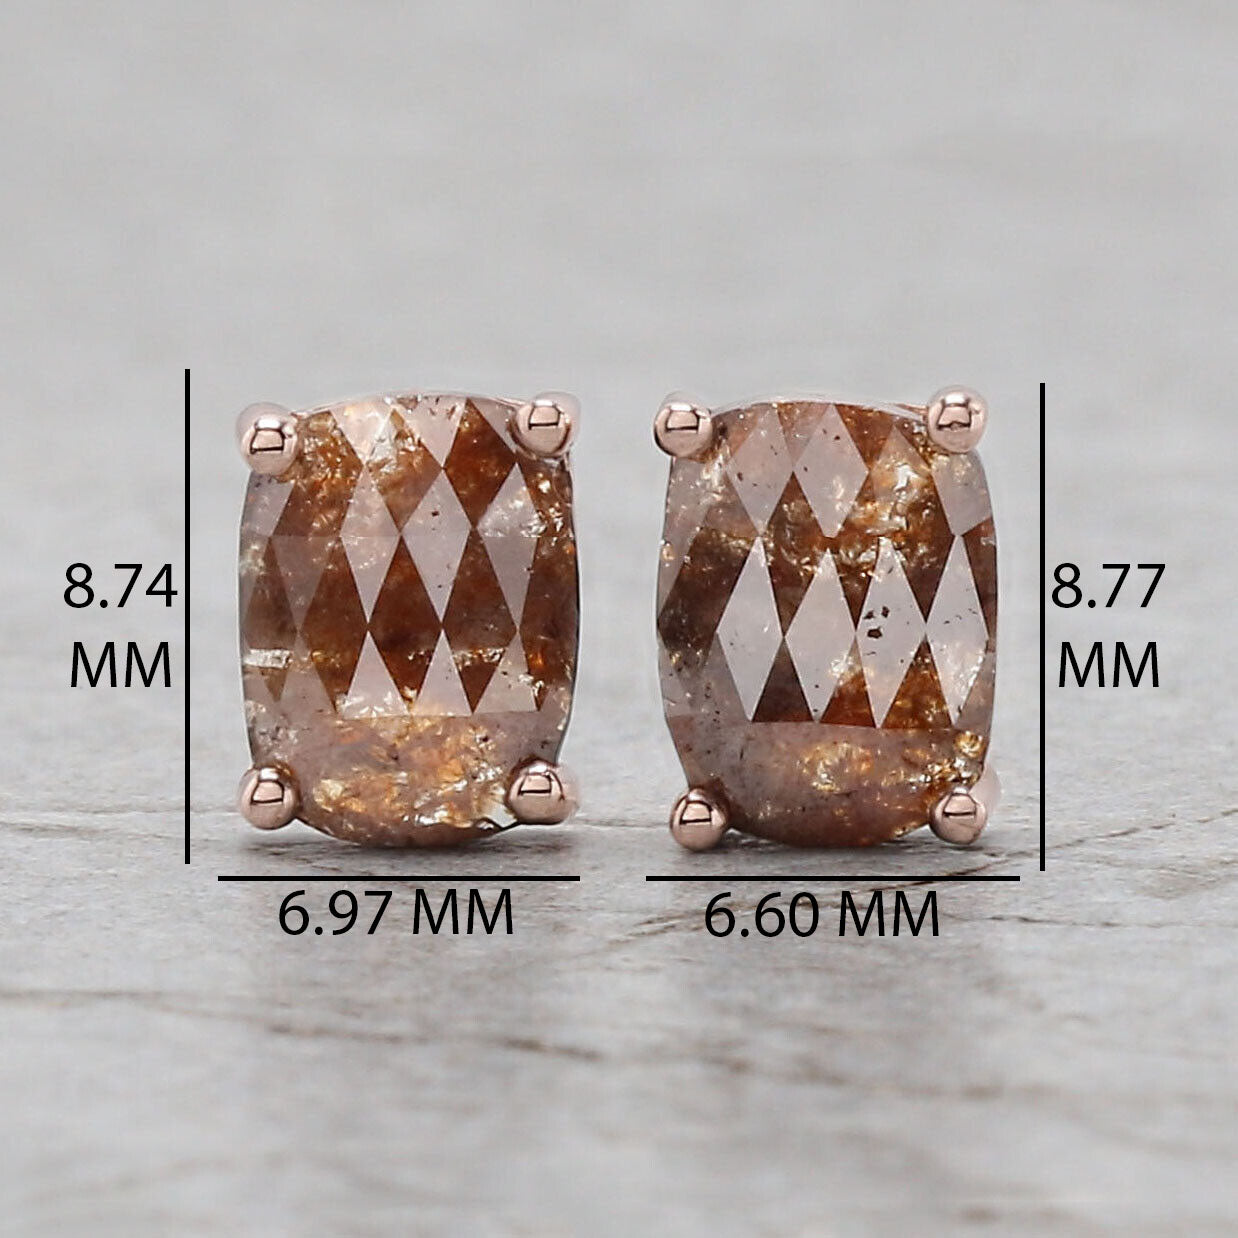 Cushion Brown Color Diamond Earring Engagement Wedding Gift Earring 14K Solid Rose White Yellow Gold Earring 2.49 CT KDN8224